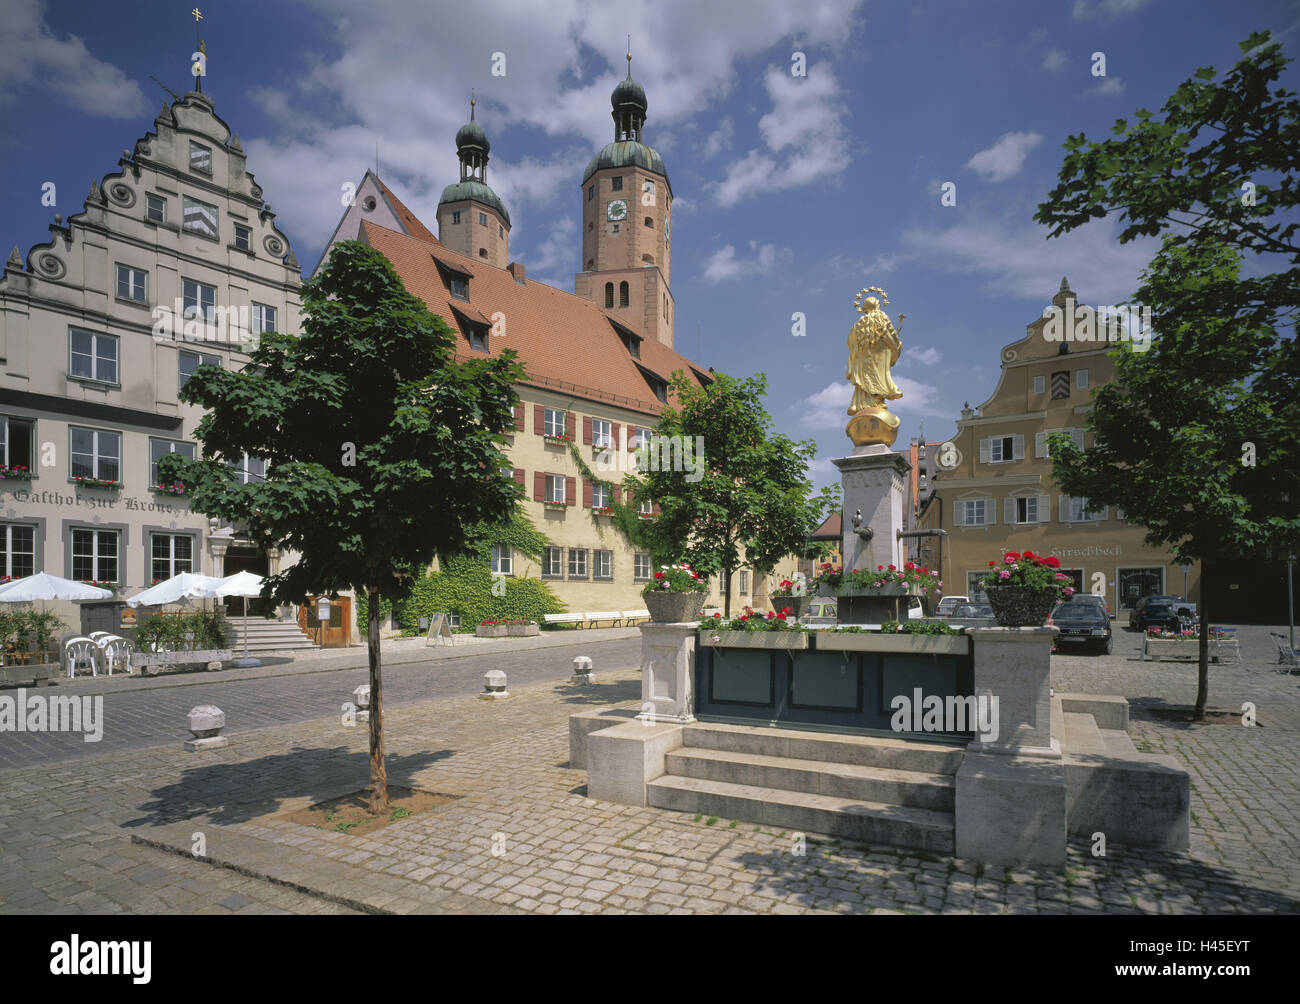 Germany, Bavaria, Wemding, marketplace, parish church, well, Europe, South Germany, Swabian, Danube ream, town, centre, city centre, architecture, church, sacred construction, architectural style, late Gothic, towers, steeples, doubles towers, church, well figure, golden, trees, outside, deserted, Stock Photo